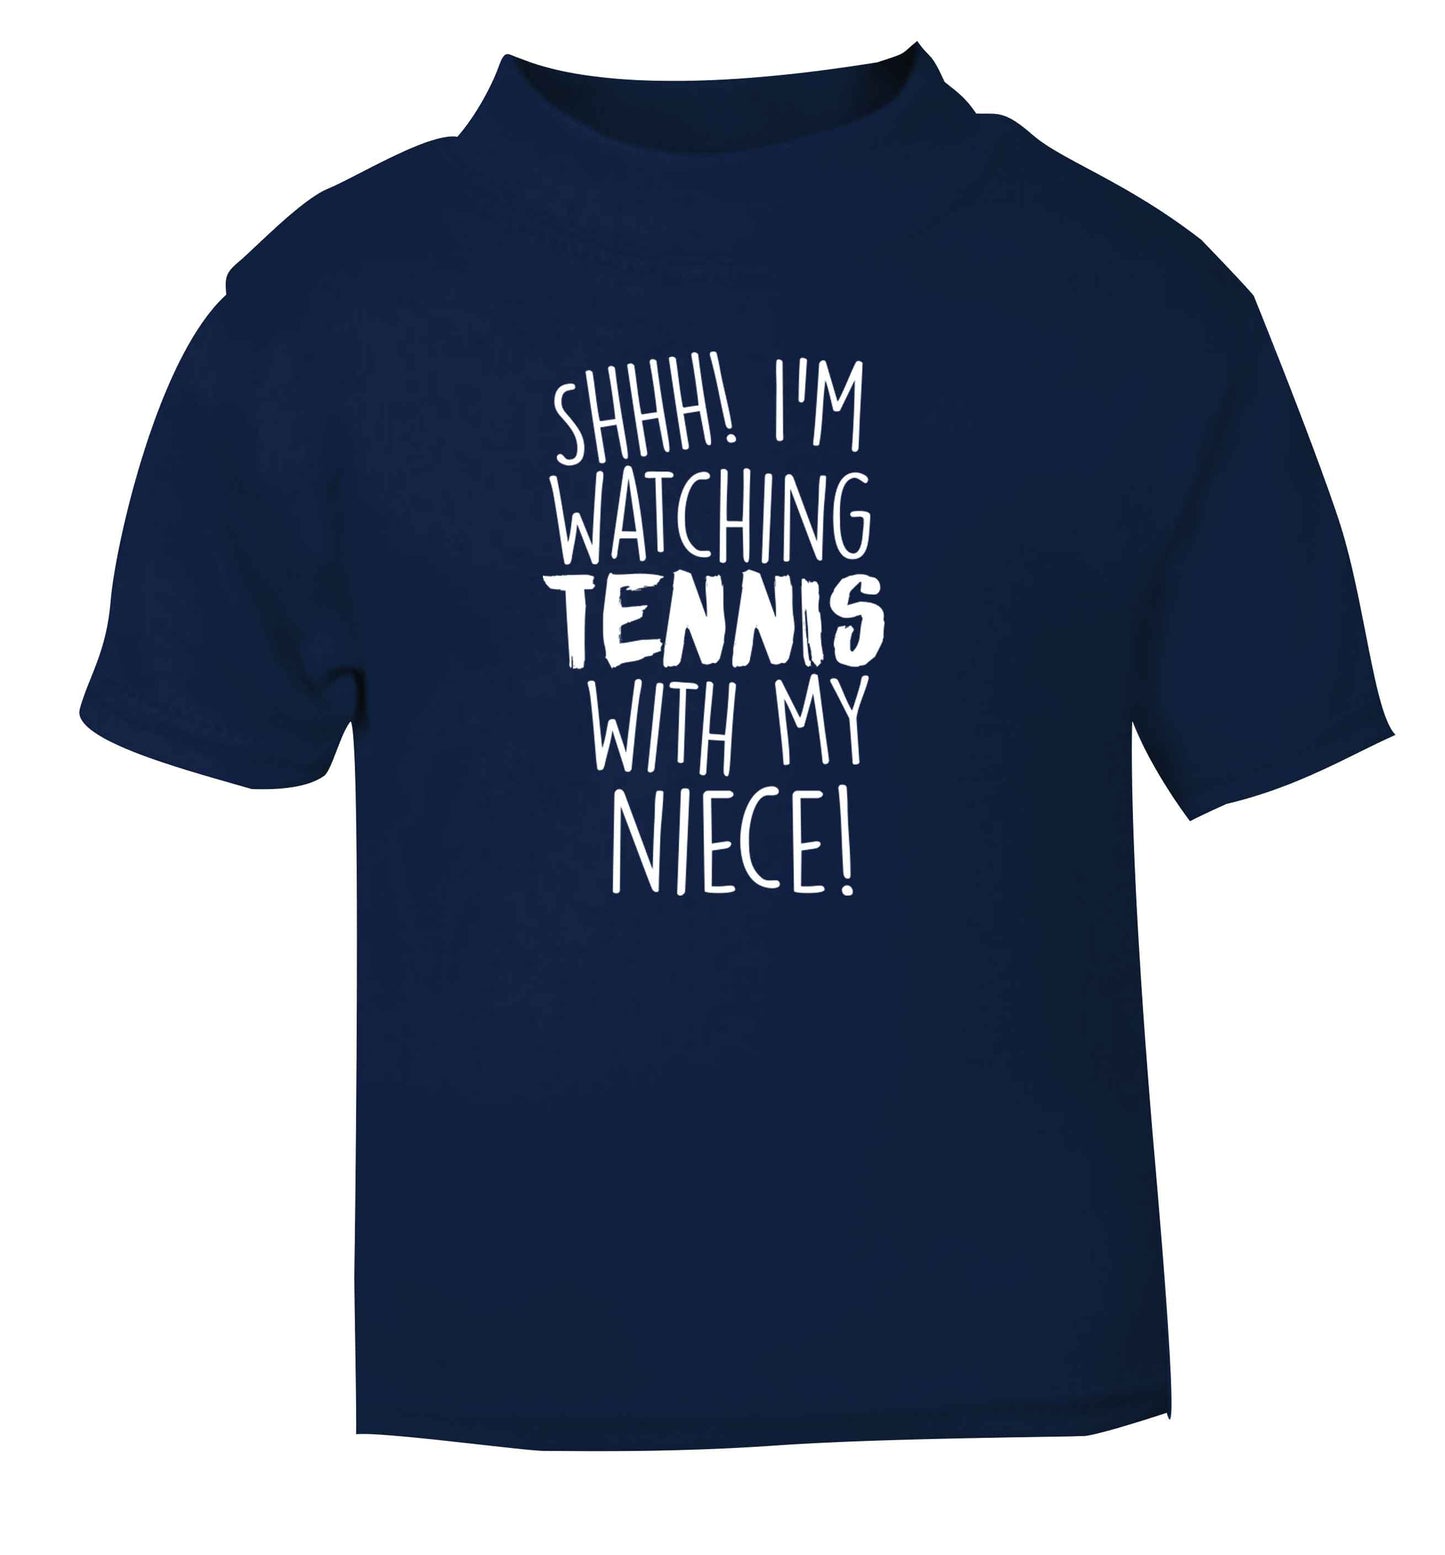 Shh! I'm watching tennis with my niece! navy Baby Toddler Tshirt 2 Years